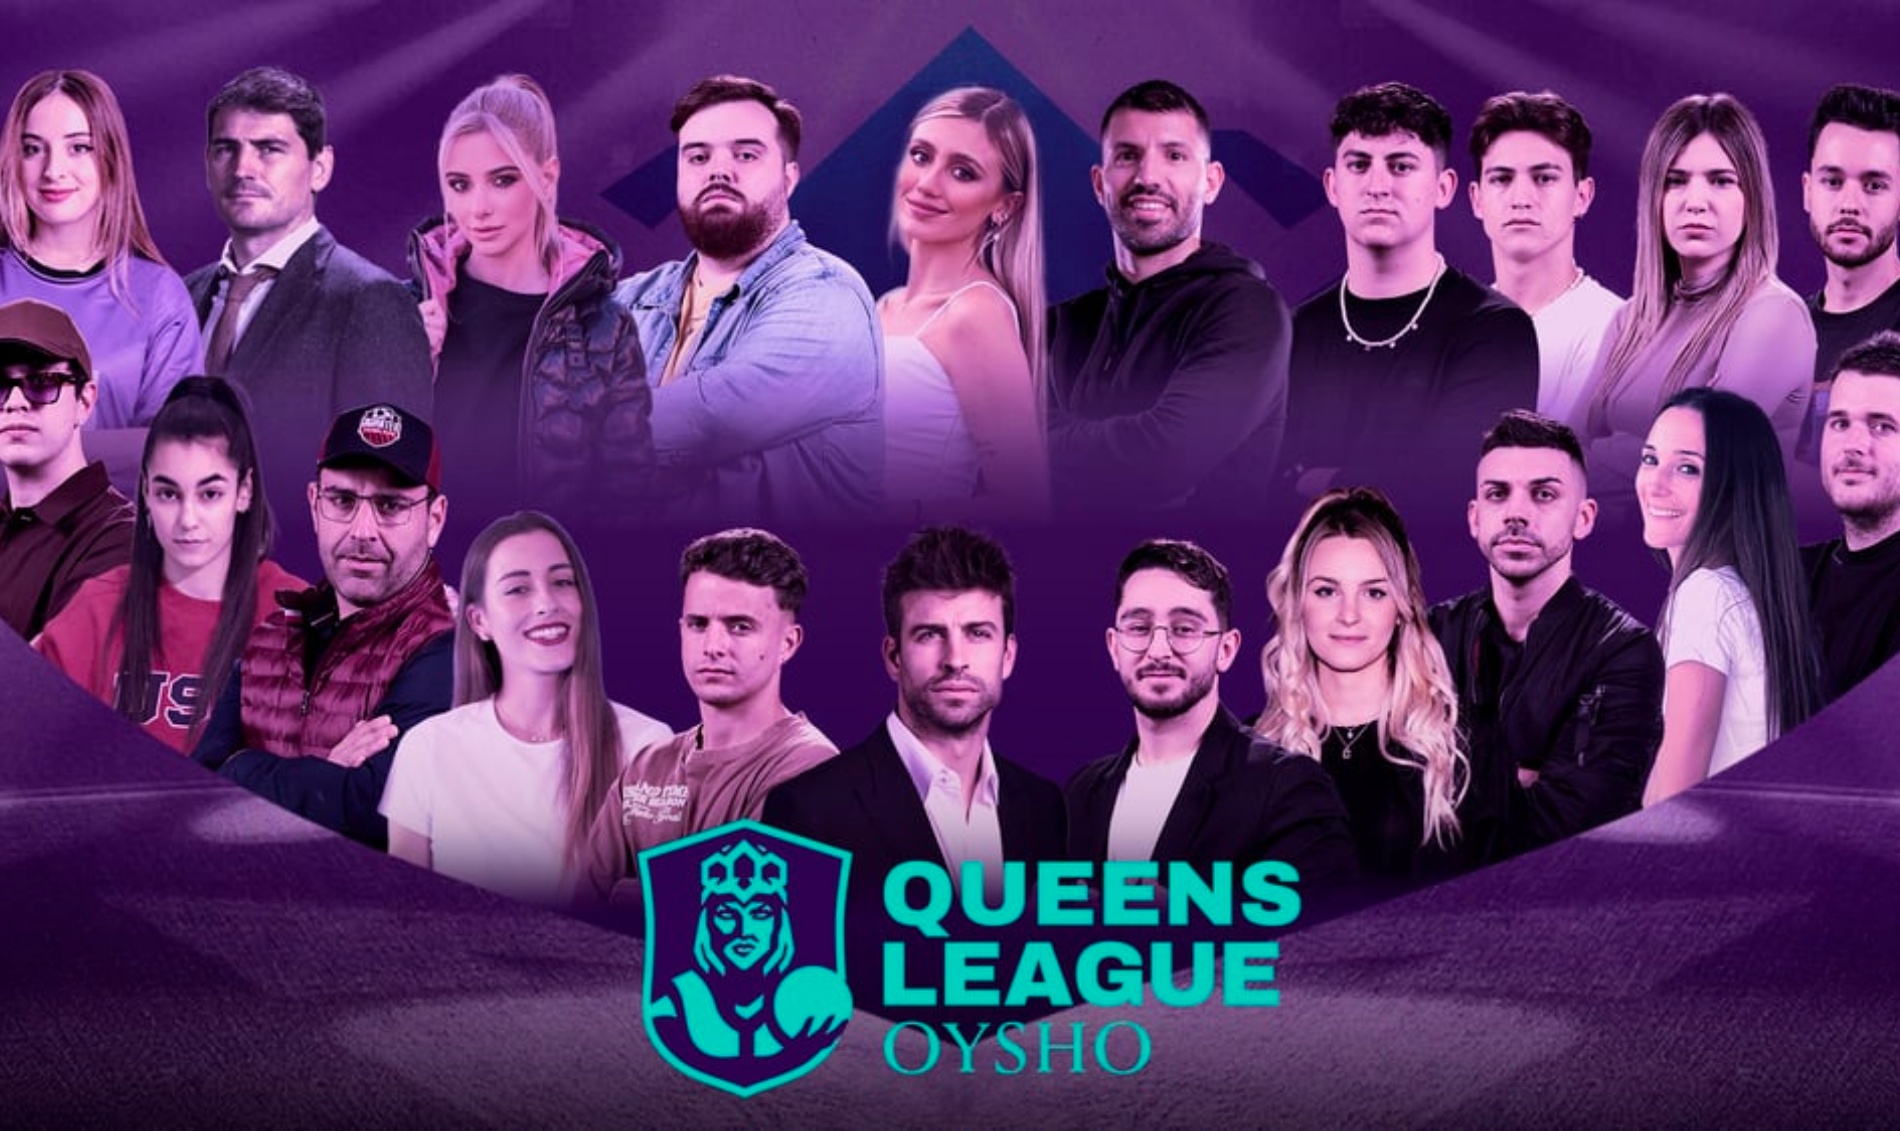 The Kings League 2023 is now one of the biggest events in live-streaming